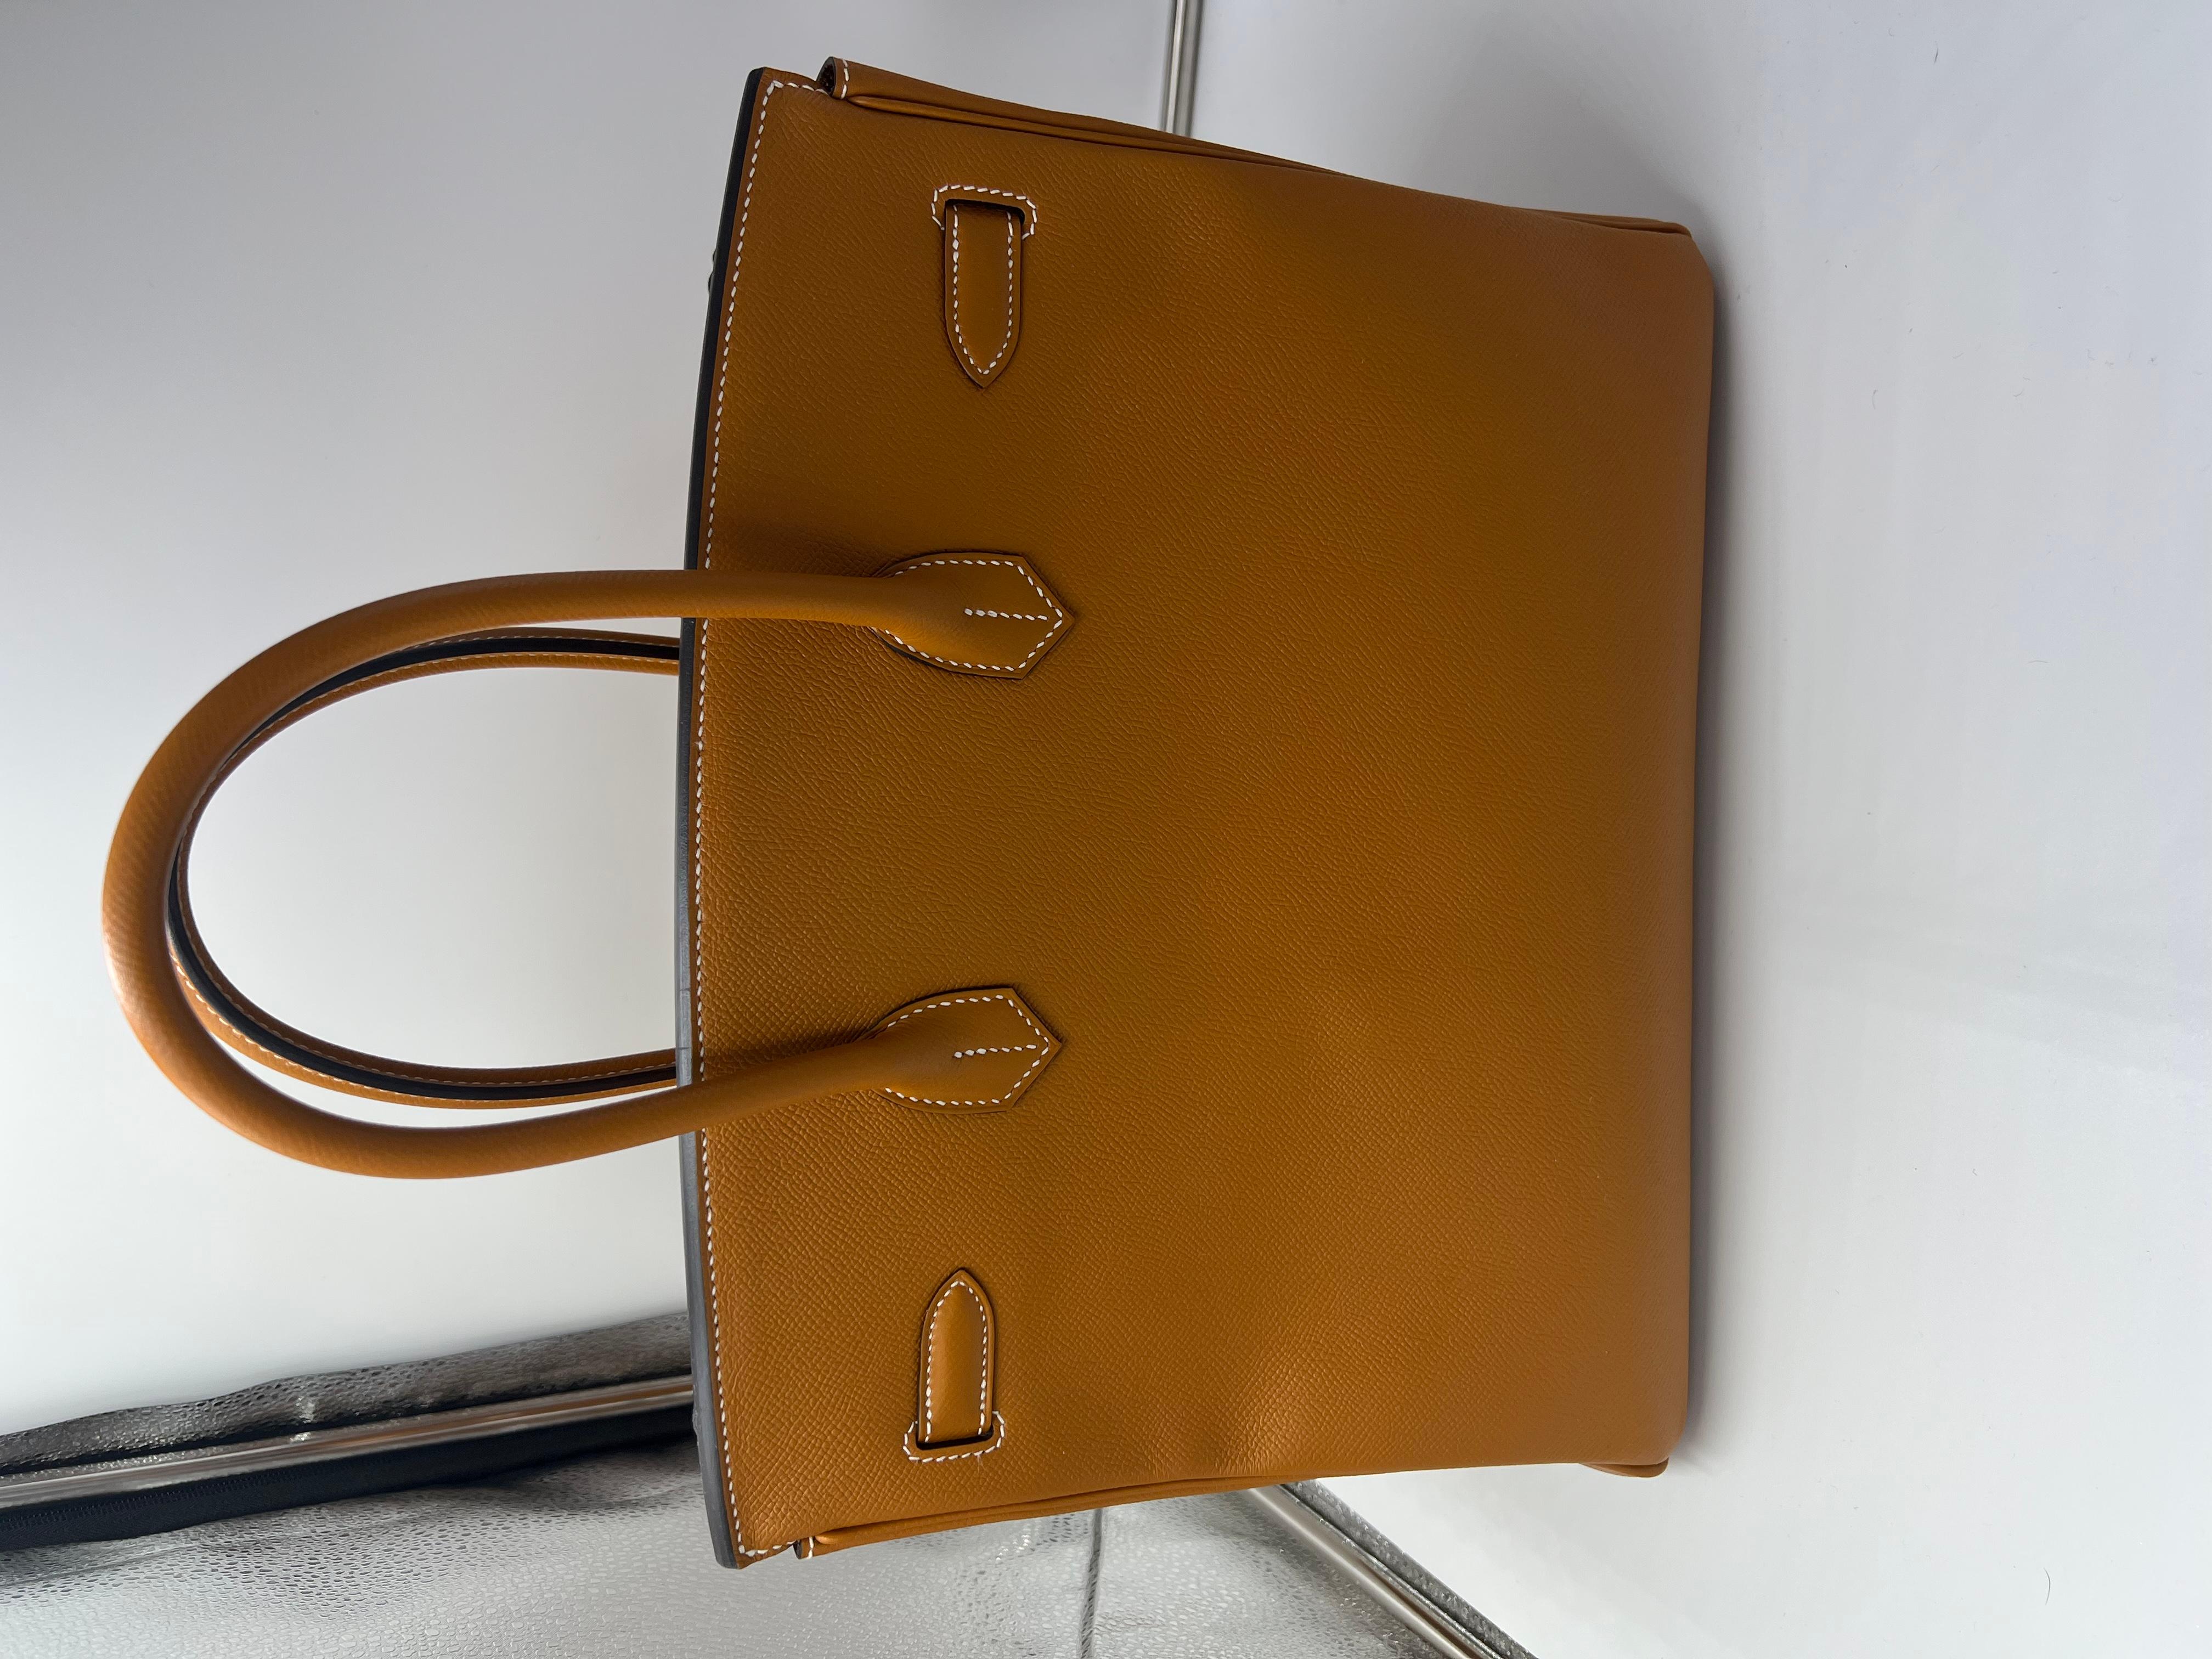 Hermes Birkin 35 brown epsom phw bag In Excellent Condition For Sale In London, England